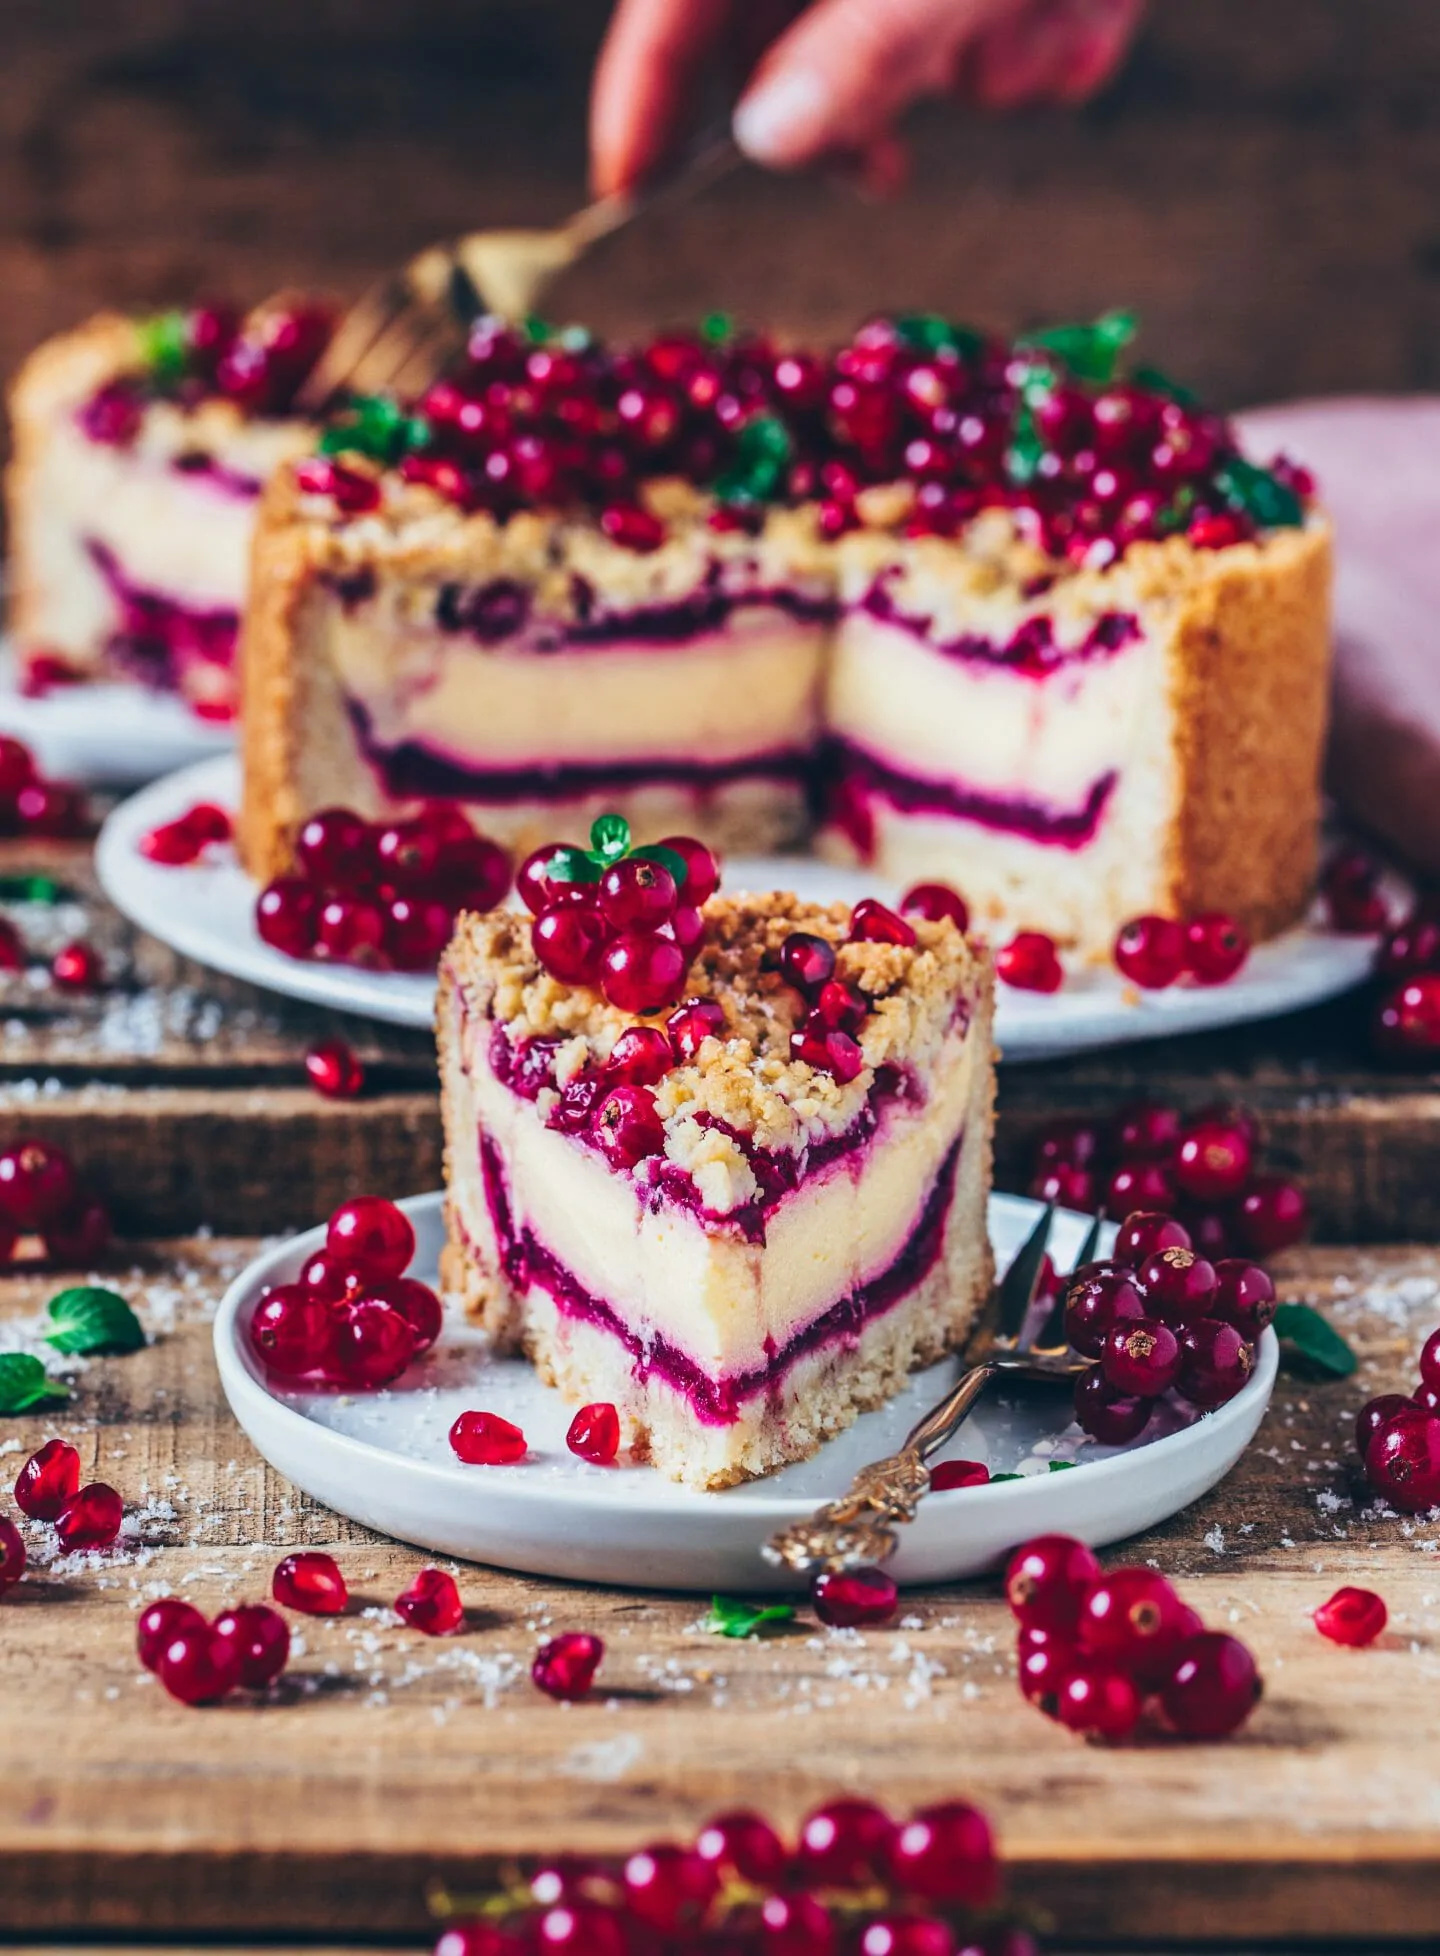 Red currant cheesecake, Irresistible dessert, Decadent and sweet, Vegan delight, 1440x1960 HD Phone